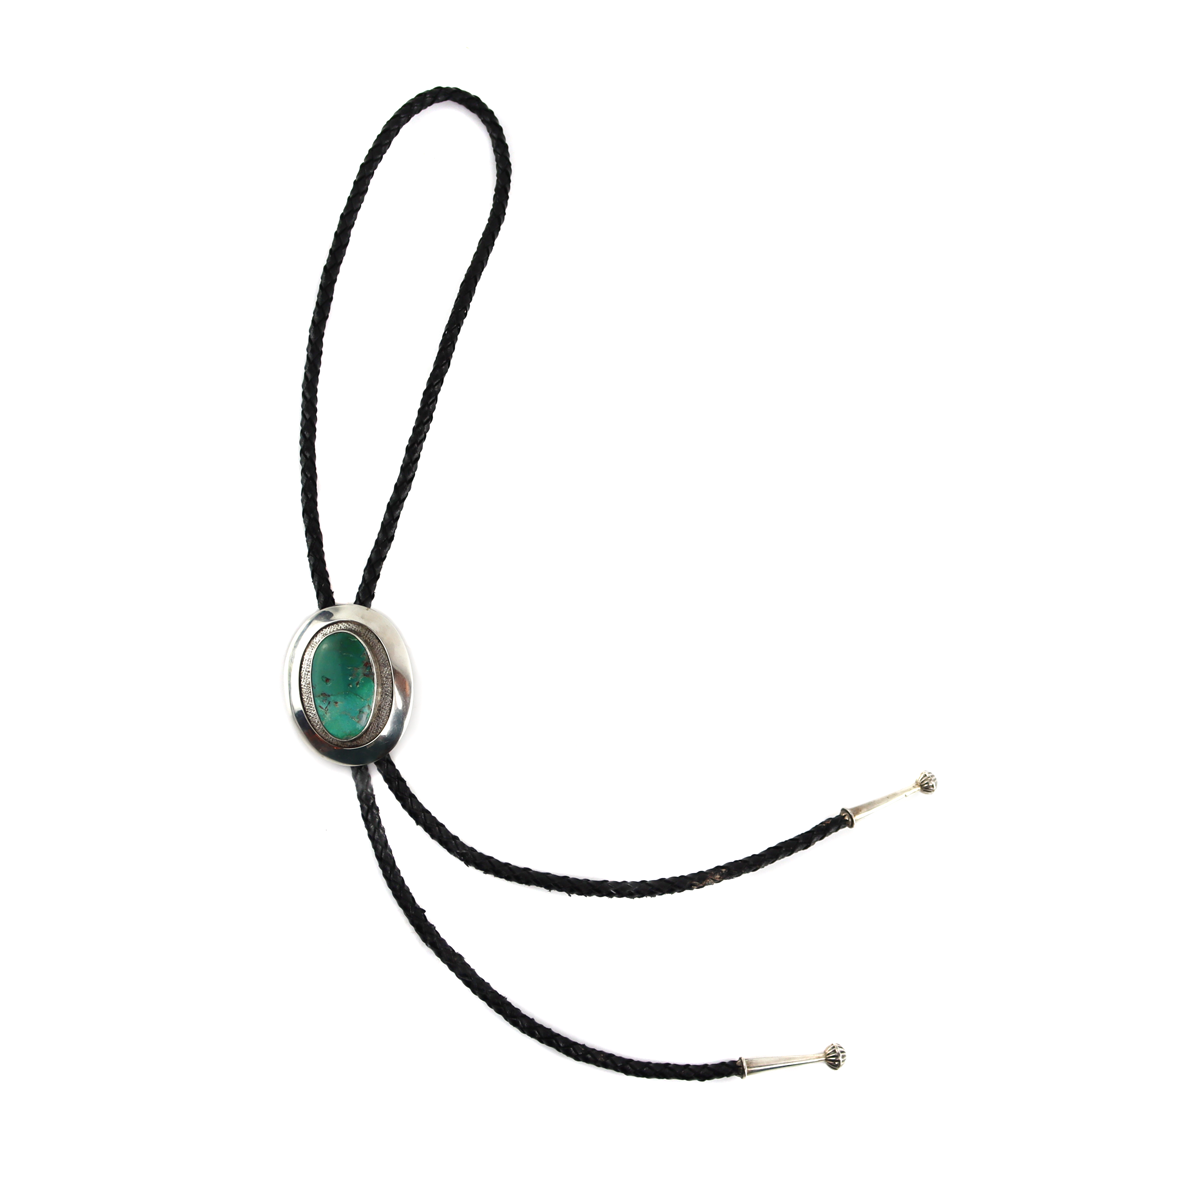 Sam Patania - Contemporary Turquoise, Sterling Silver, and Leather Bolo Tie, 2.5" x 2" bolo (J92626-1123-001)